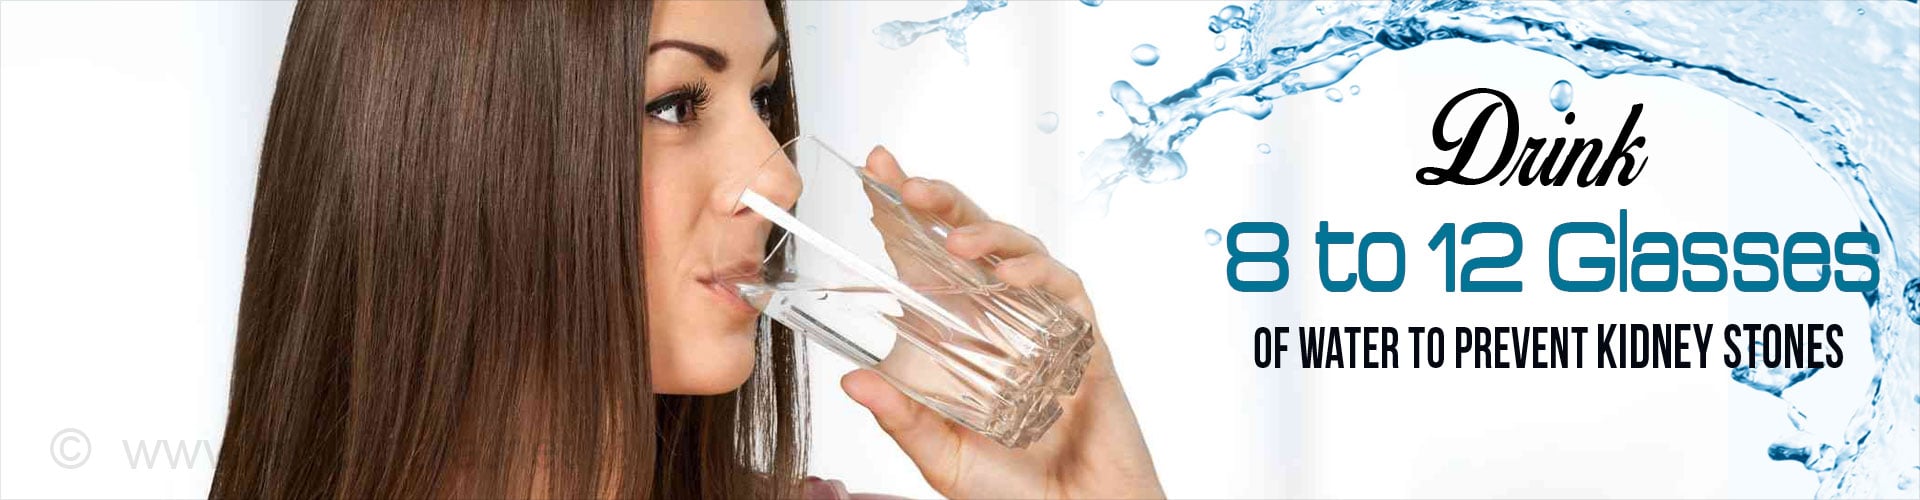 Drink 8-12 Glasses of Water to Prevent Kidney Stones